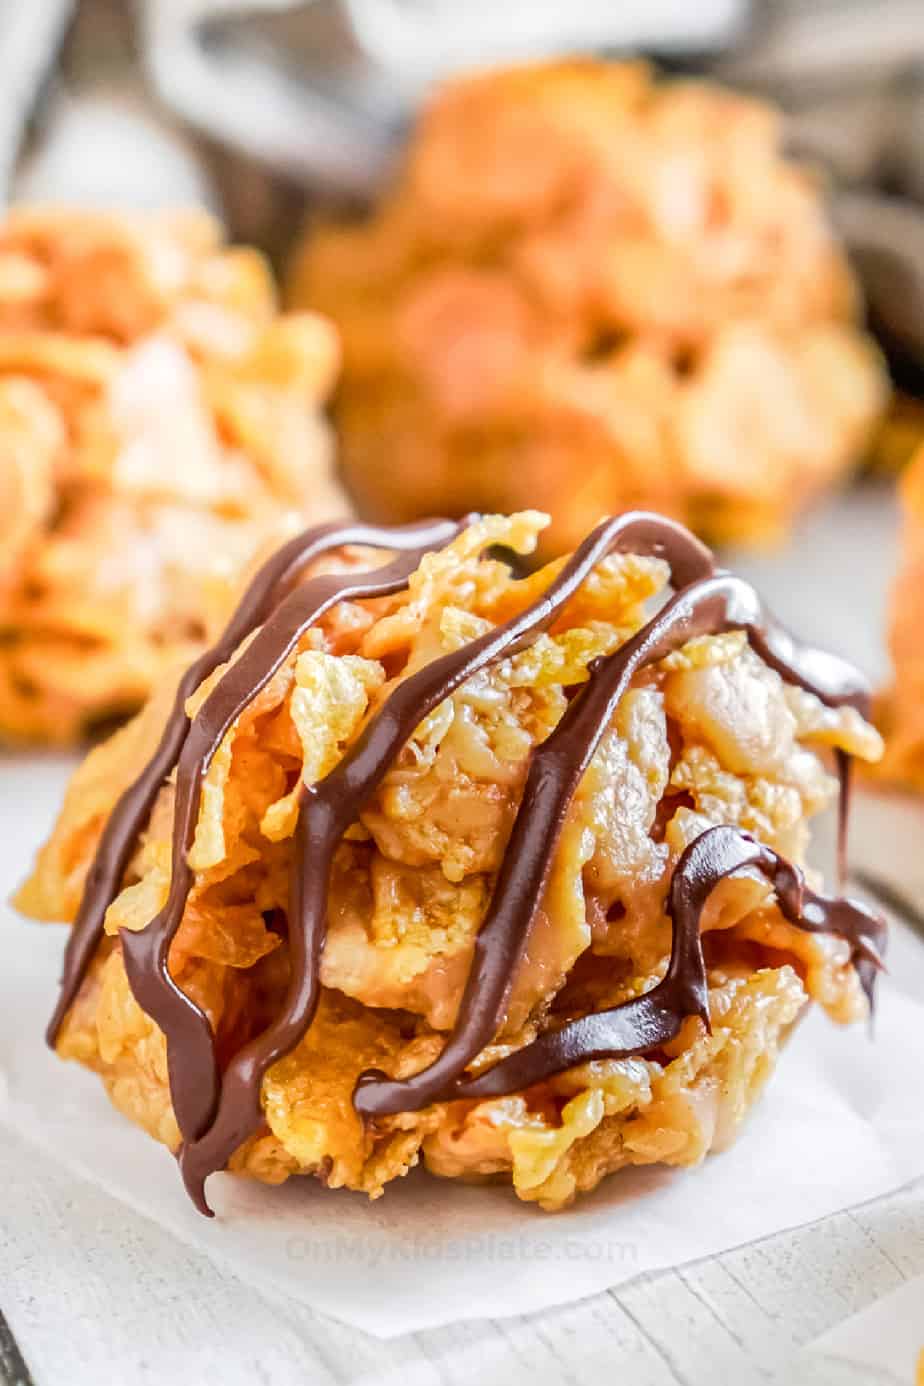 Cornflake cookie from the side drizzled with chocolate up close